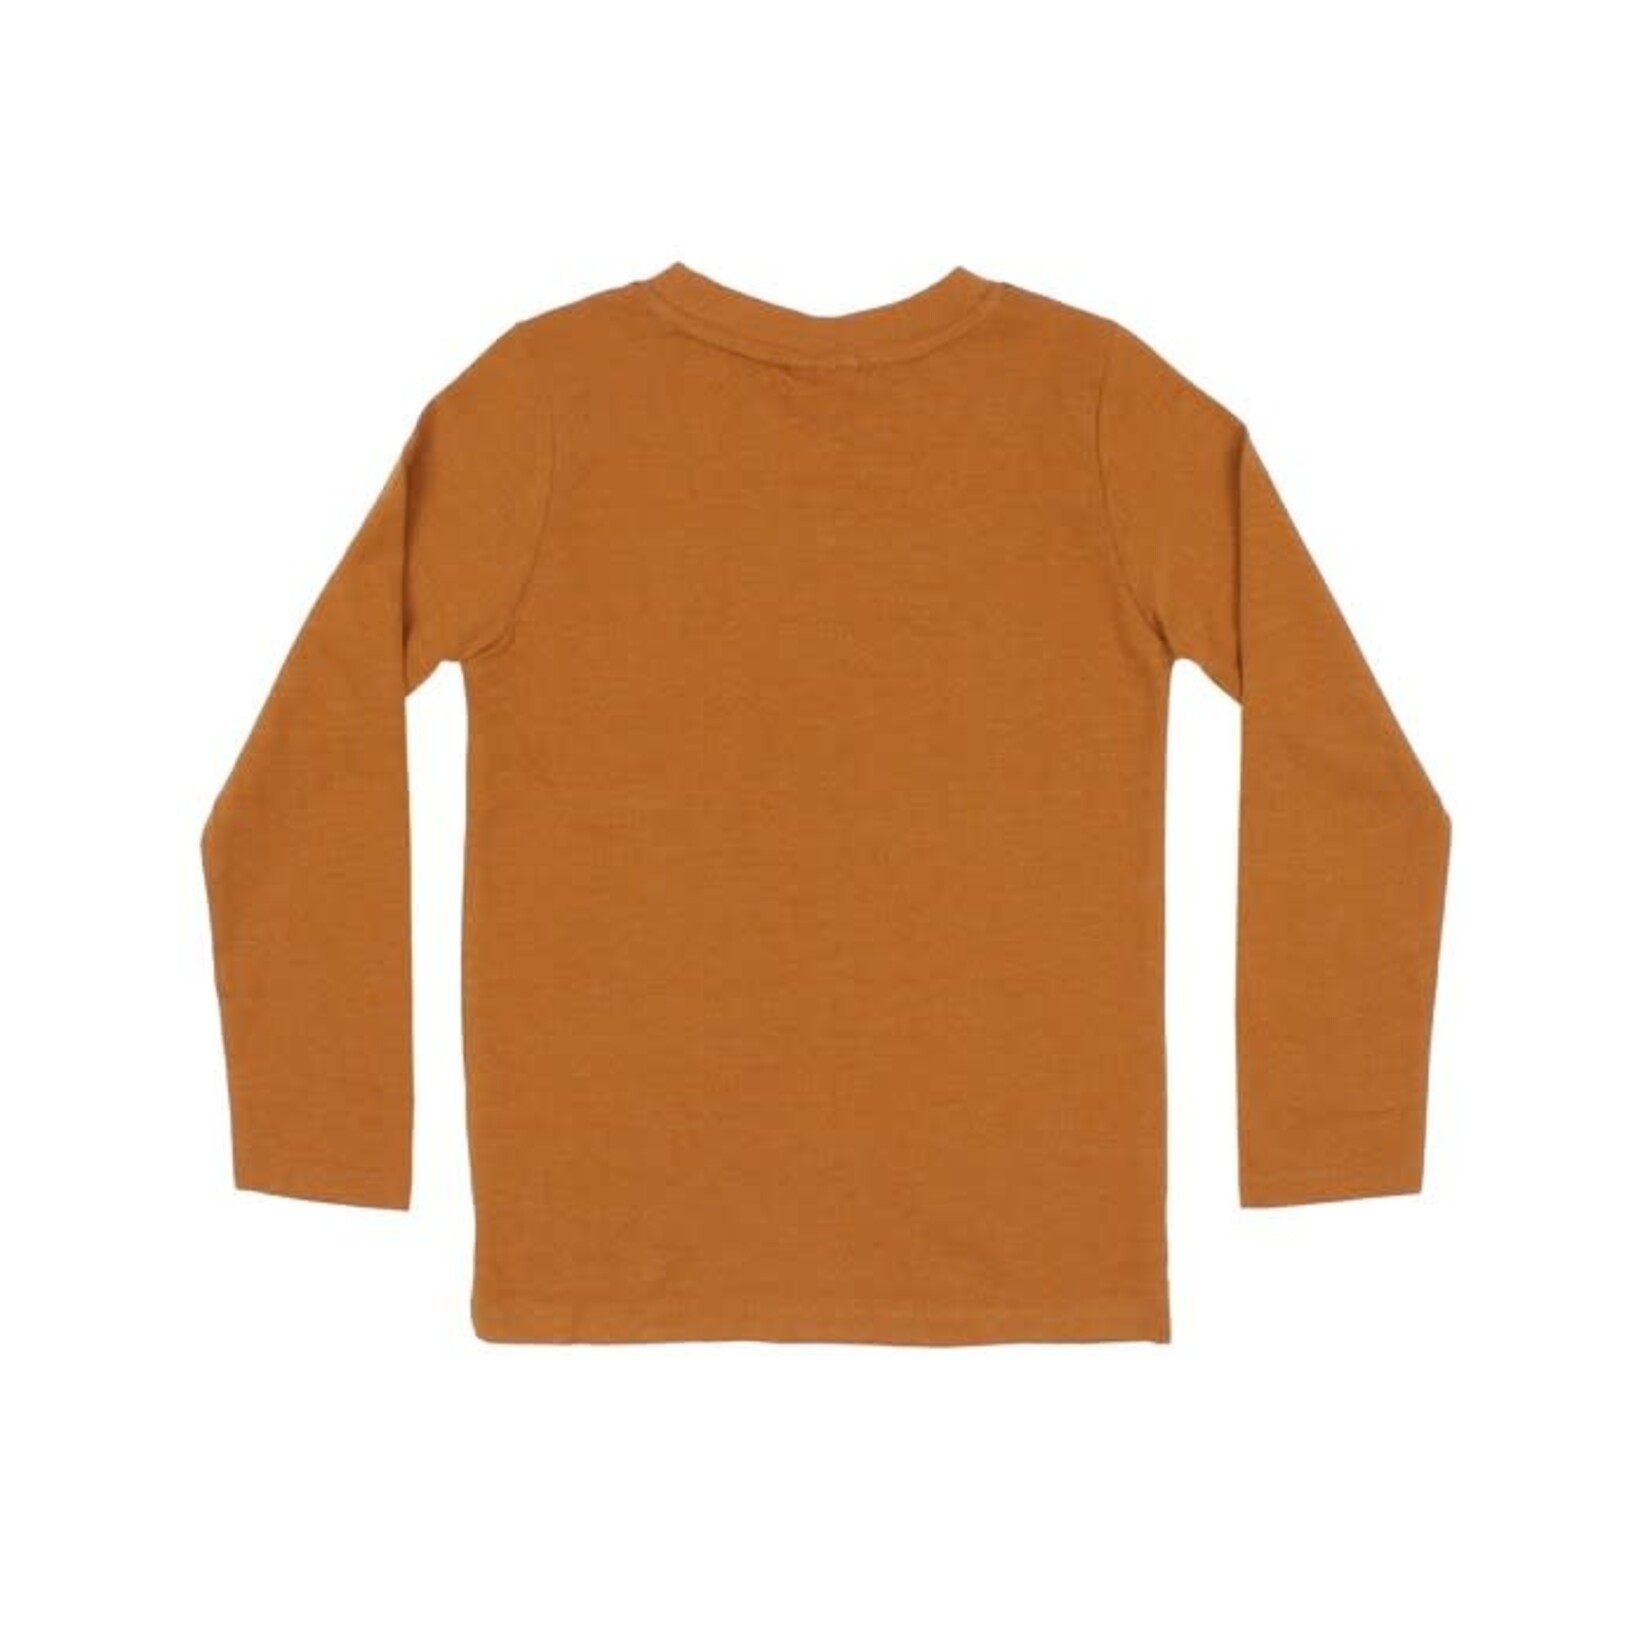 Northcoast NORTHCOAST - Long sleeve caramel-coloured t-shirt with North print 'Advendure is out there'